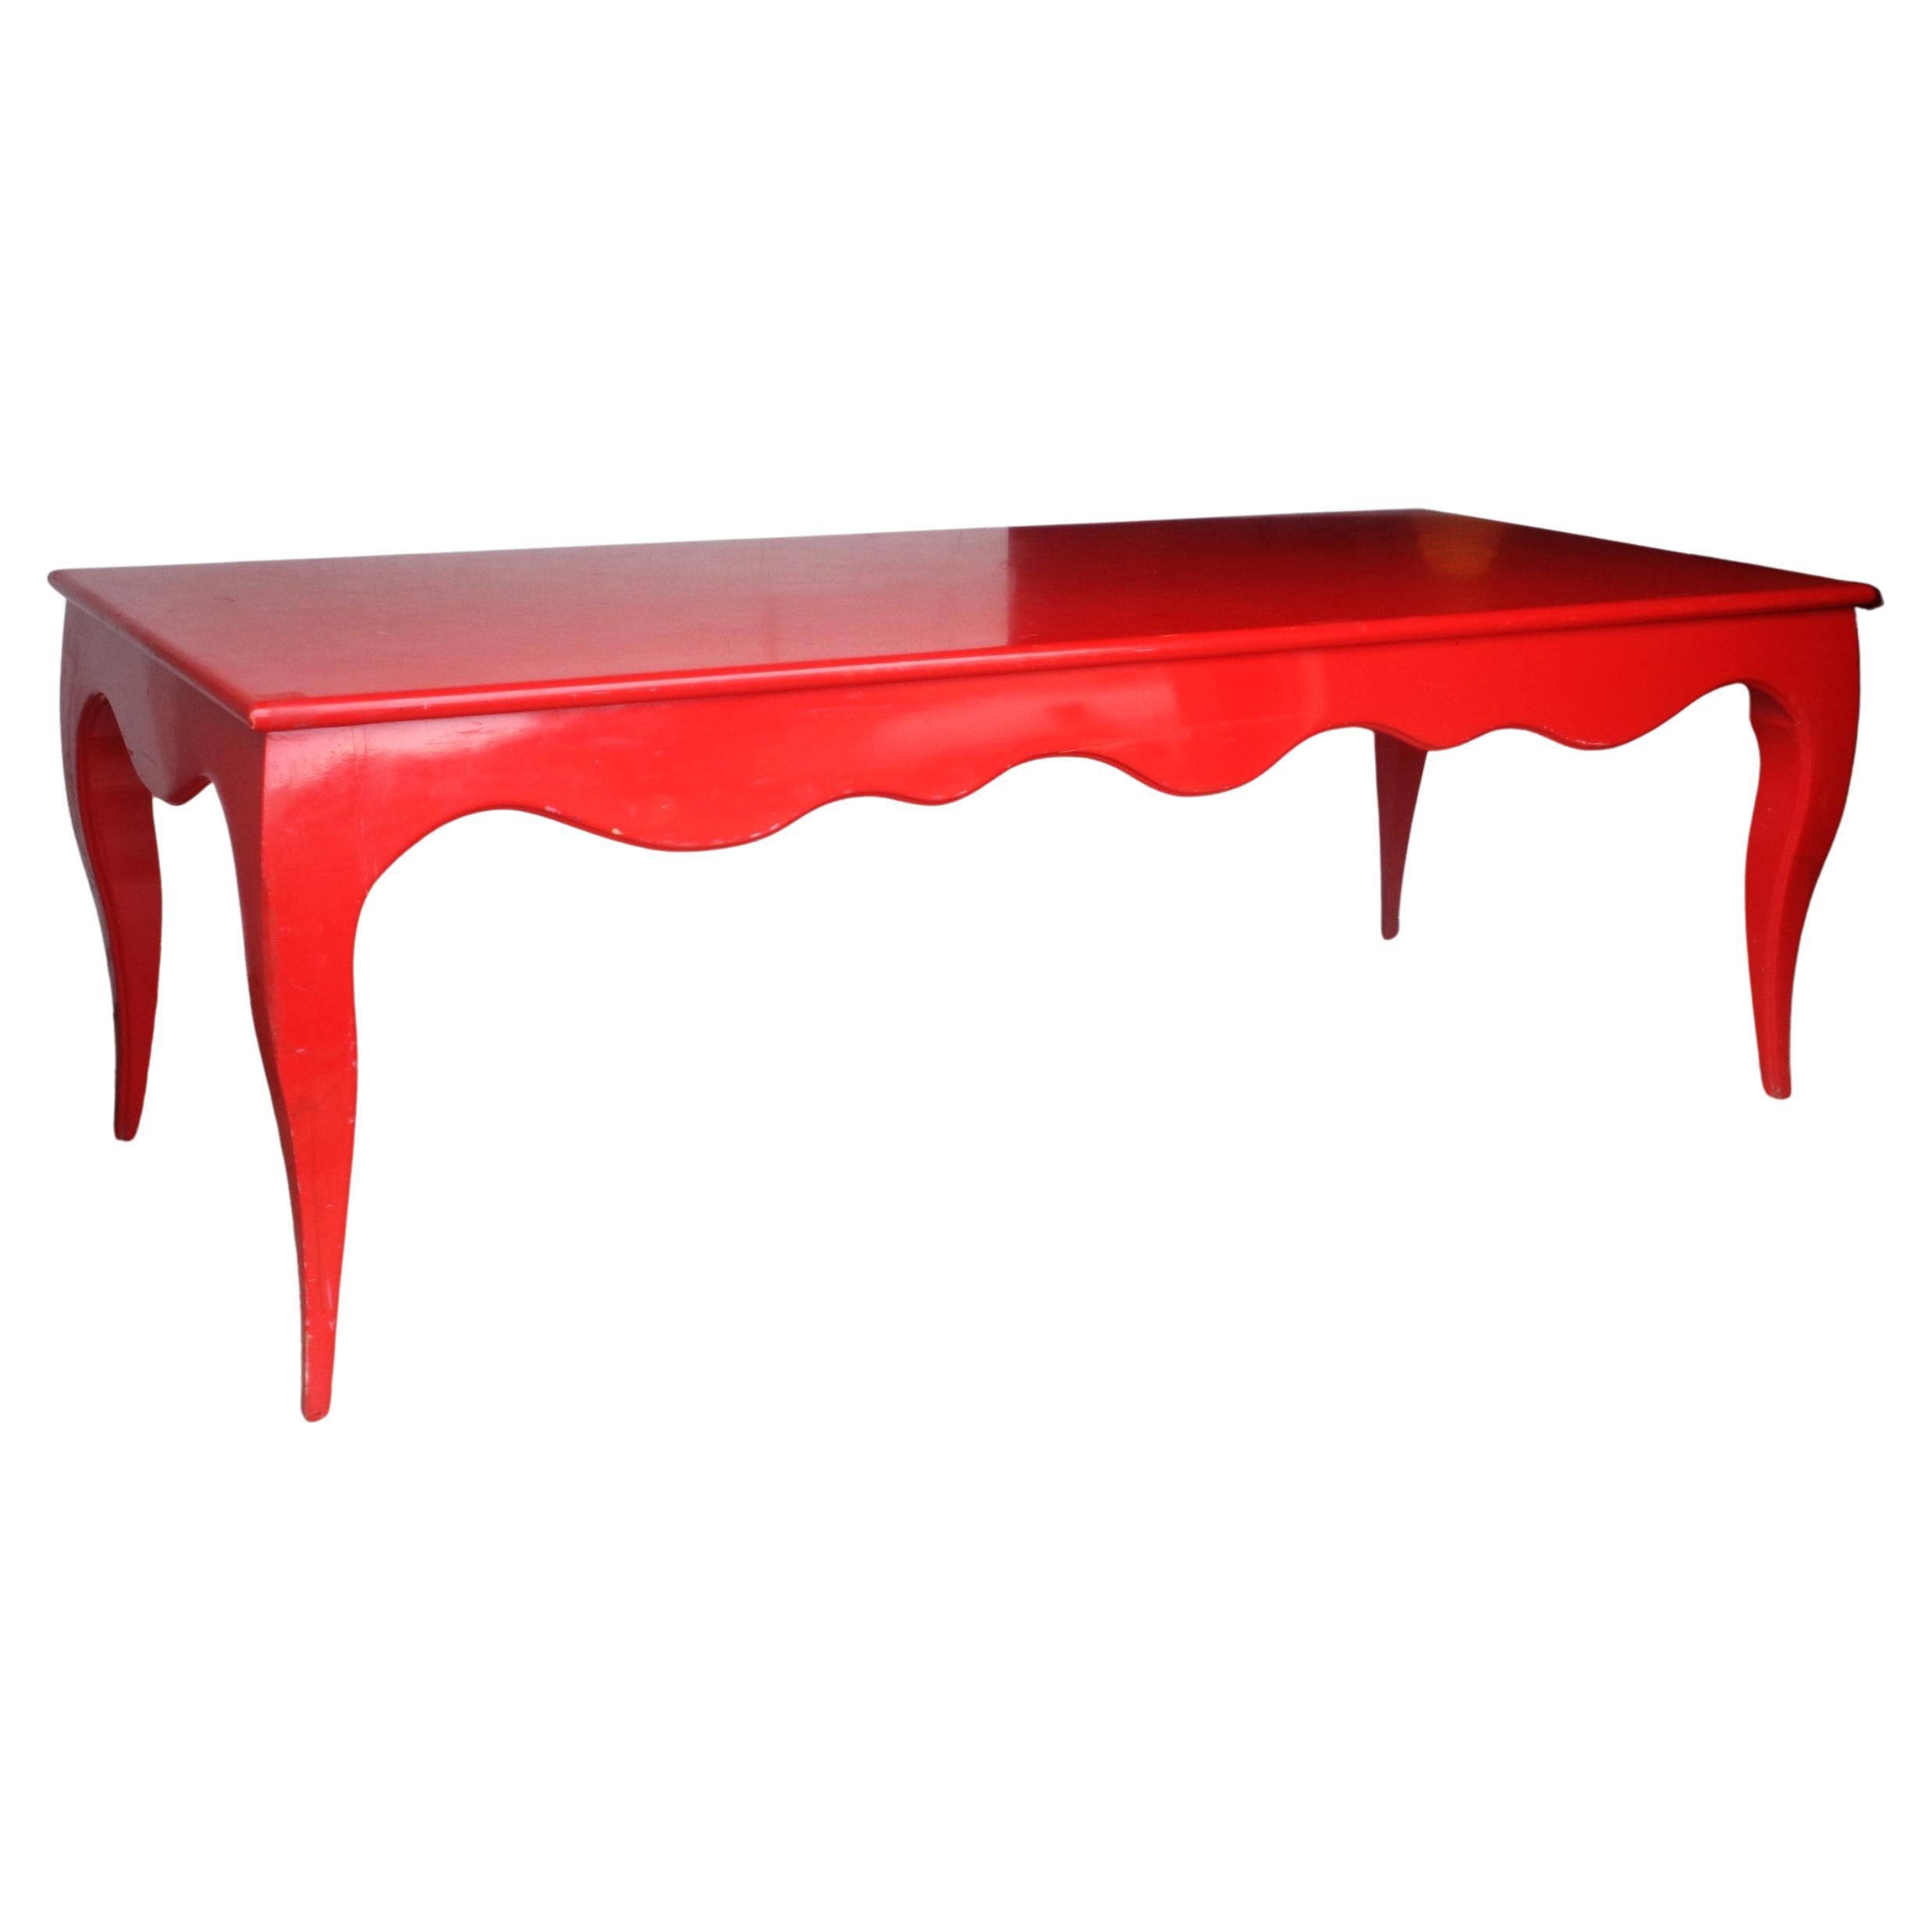 Original red lacquered table w/ wave like scalloped apron on all four sides and  curved cabriole legs. In the modernist style of Jean-Michel Frank. Exceptionally beautiful. Use as kitchen island / library table / serving table / store display table